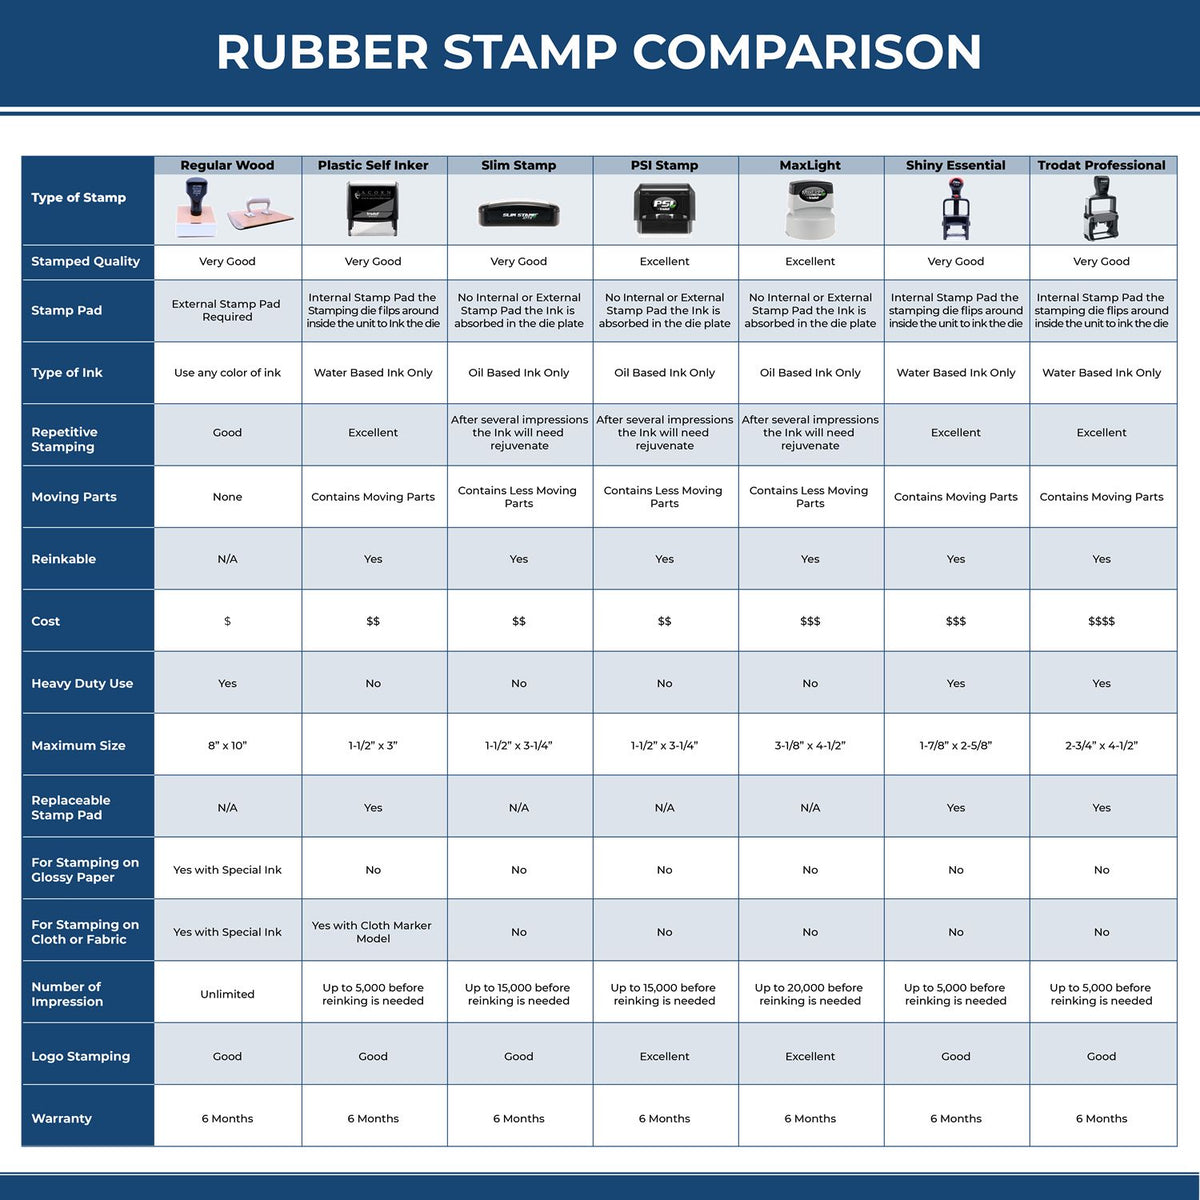 You Insurance has Paid their portion Rubber Stamp 4742R Rubber Stamp Comparison